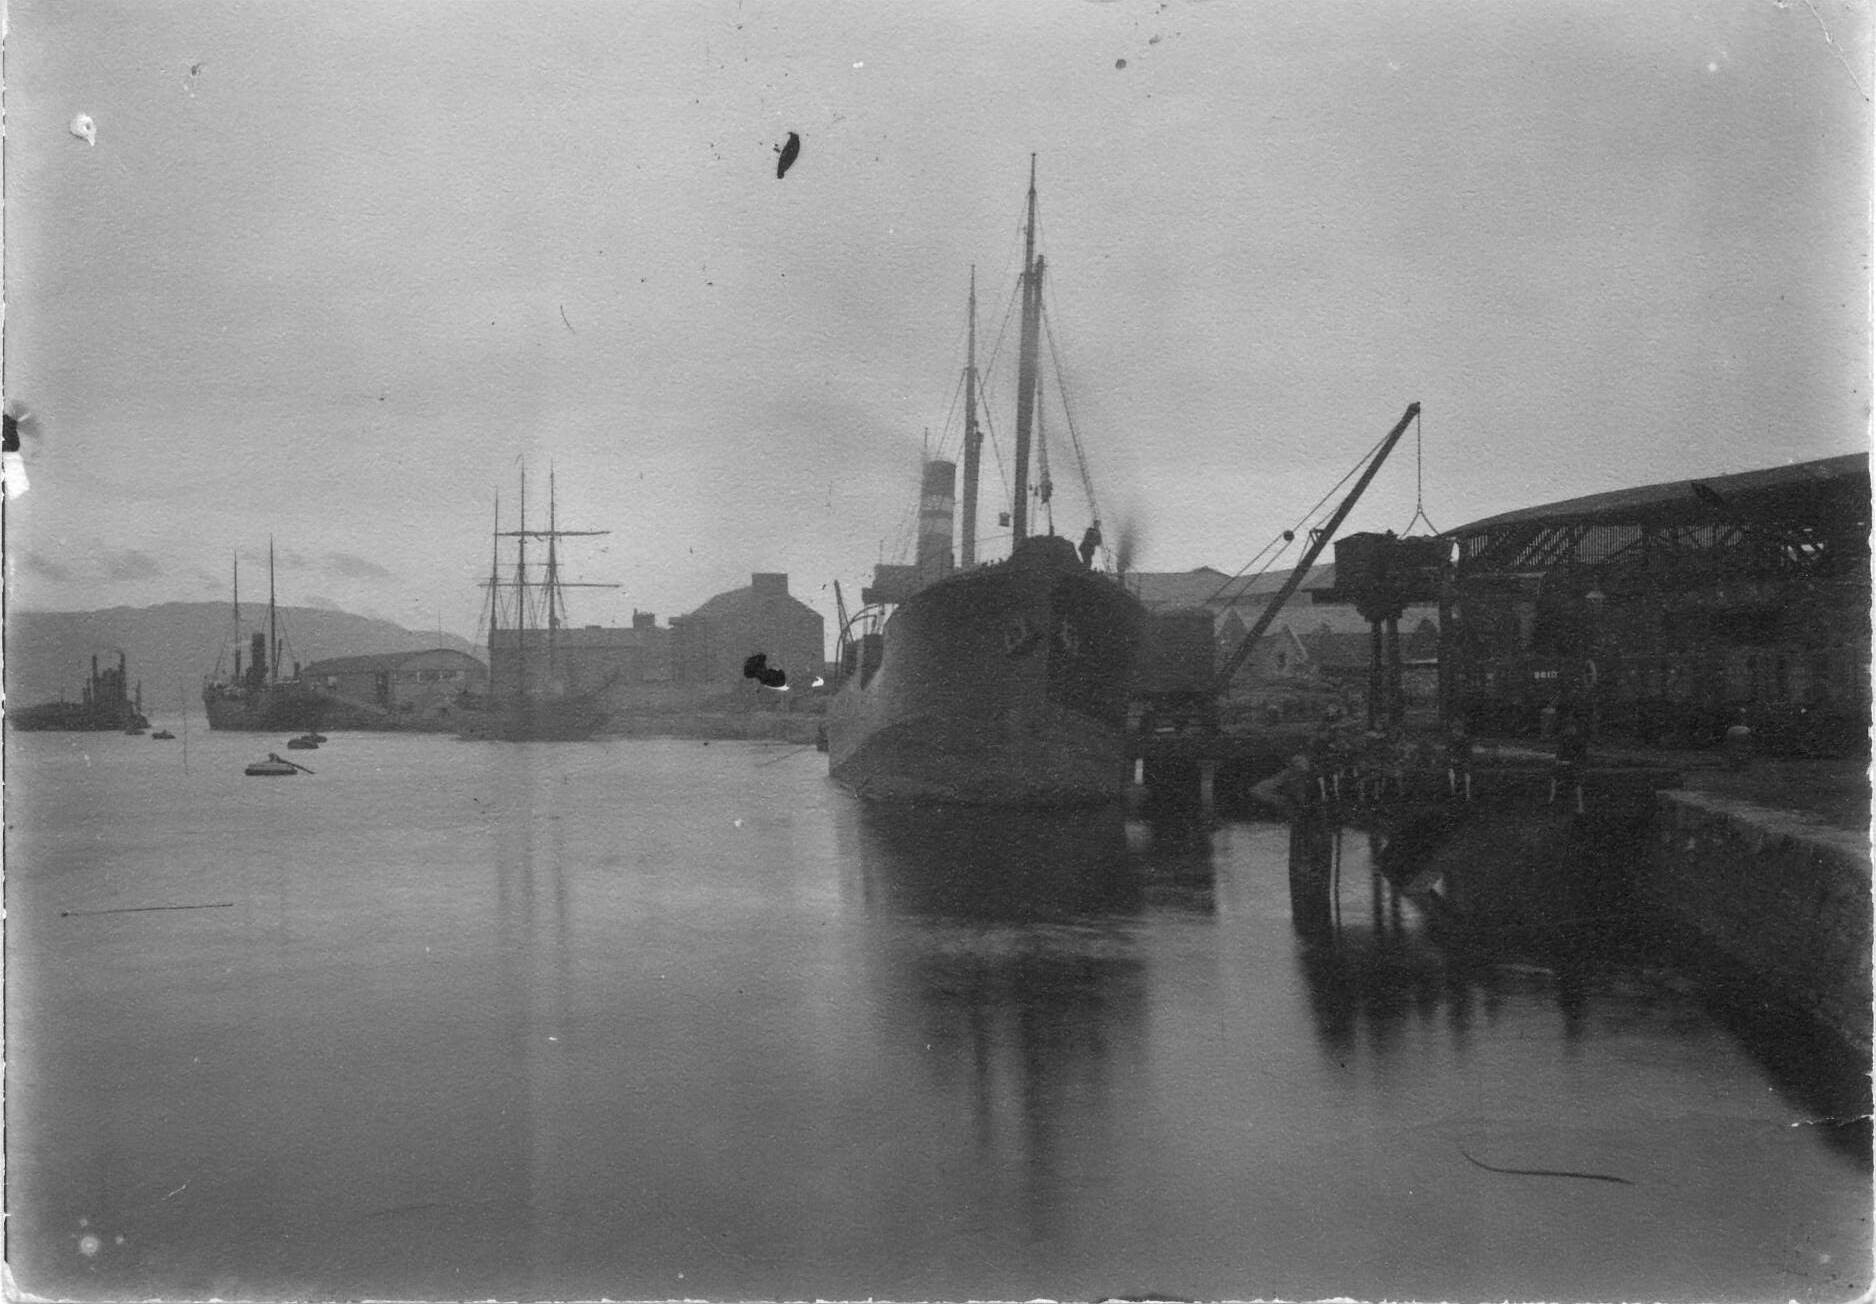 Dundalk harbour scene. Charlie McCarthy: showing from left-right: Dundalk Harbour Commissioners steam bucket dredger “Faugh-a- Ballagh” with hoppers alongside; steam passenger/livestock ship (probably the ss “Dundalk”); steampacket office and Jennings large store; a three mast sail vessel moored at Williamsons quay; a steam collier at Connicks quay with a steam crane discharging coal onto the overhead gantry and screened into railwagons underneath; and a group of children sitting on Browns quay. These quays, actually wooden jettys, were built over in the early 1930’s.